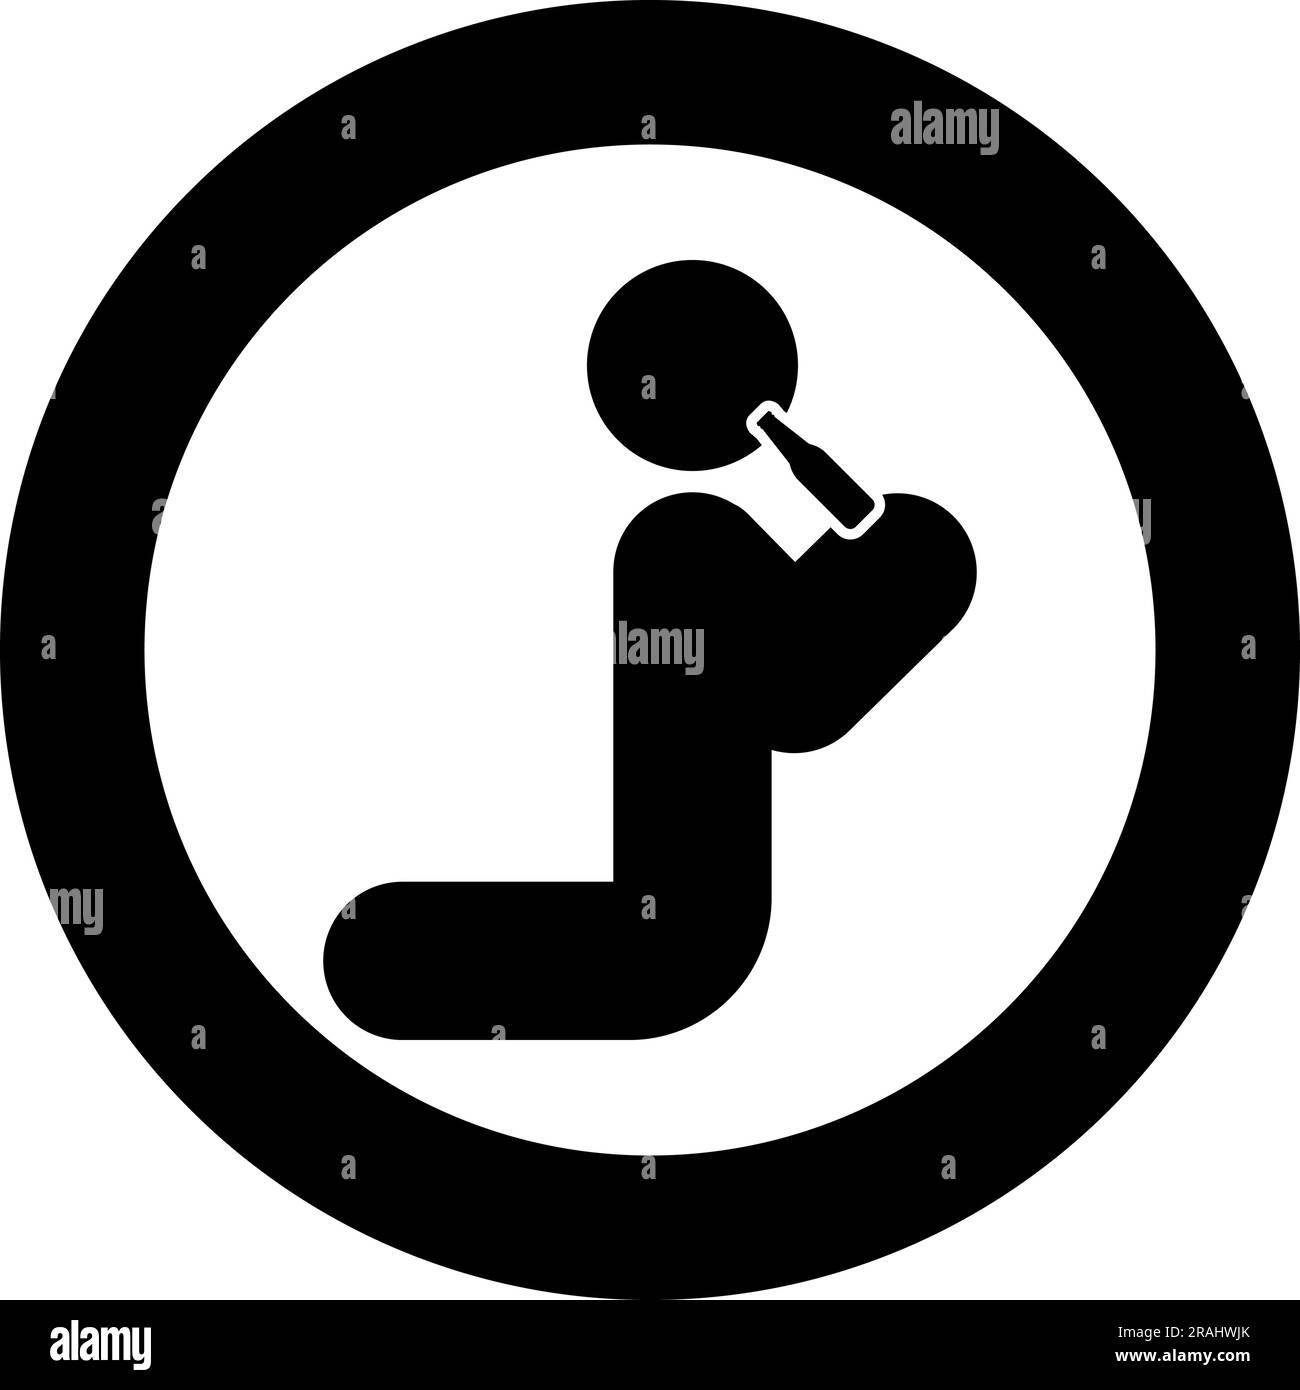 Man human drinking water alcohol beer from bottle knight position icon in circle round black color vector illustration image solid outline style Stock Vector